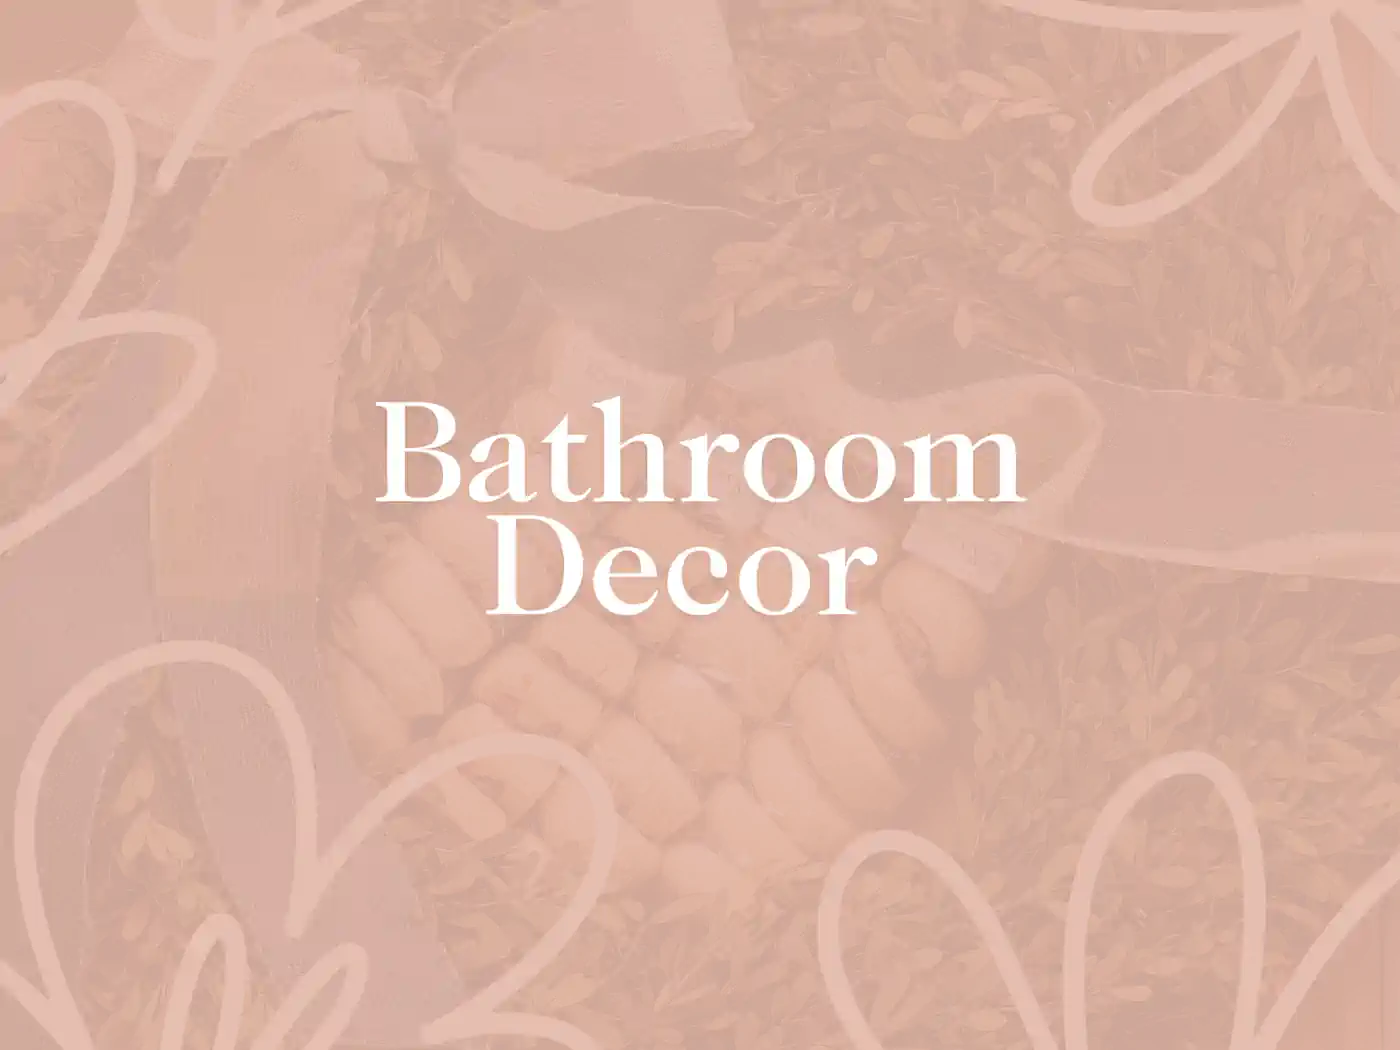 Elegant bathroom decor ideas and items arranged with natural elements, showcasing stylish and serene designs, overlay text "Bathroom Decor", Fabulous Flowers and Gifts